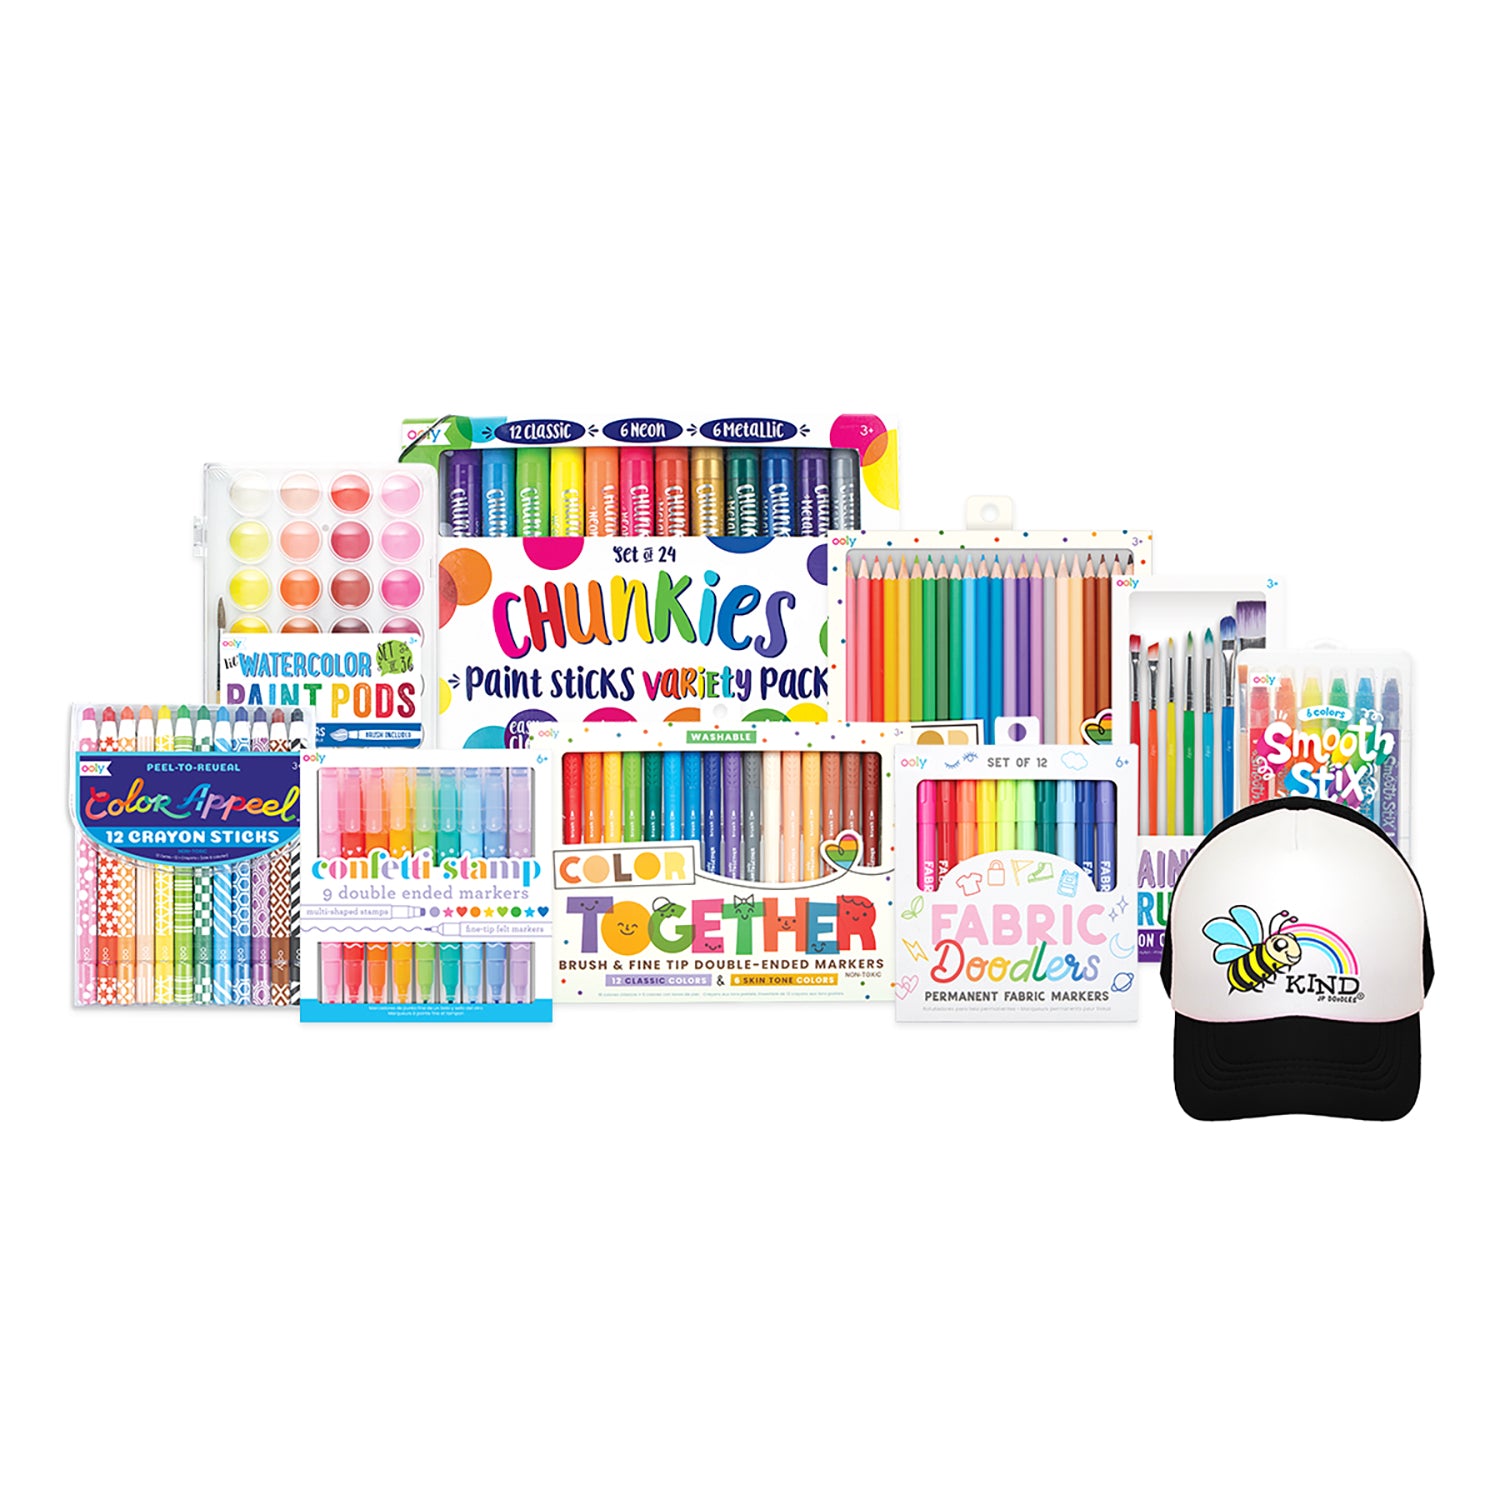 Crayola Colors of Kindness Crayons - Multi - 24 / Pack 